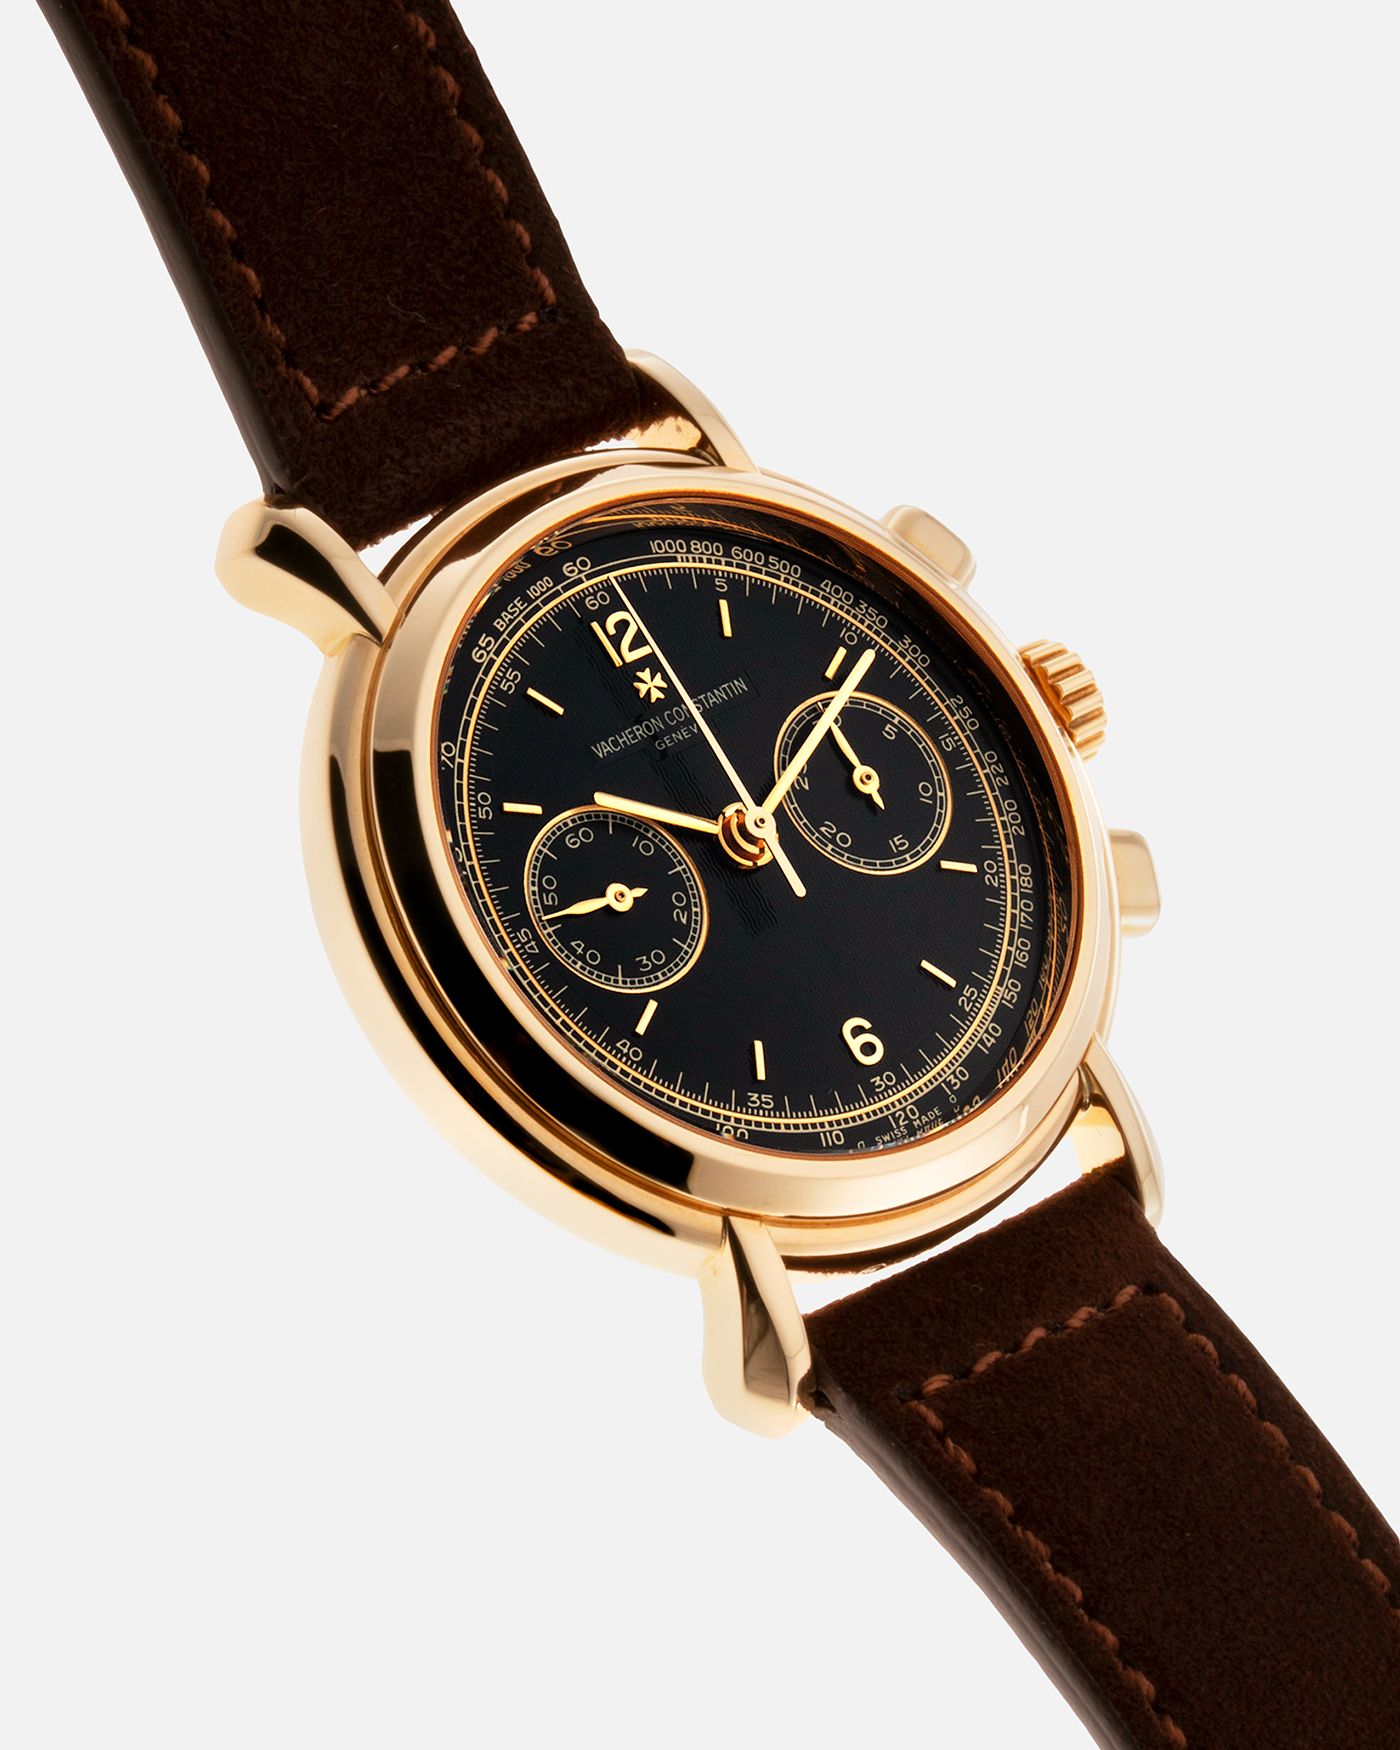 Brand: Vacheron Constantin Year: 2000's Model: Les Historiques Chronograph  Reference Number: 47101 Material: 18k Yellow Gold Movement: Lemania 2320 Based Cal. 1141 Case Diameter: 37mm Bracelet: Brown Suede with 18k Yellow Gold Tang Buckle